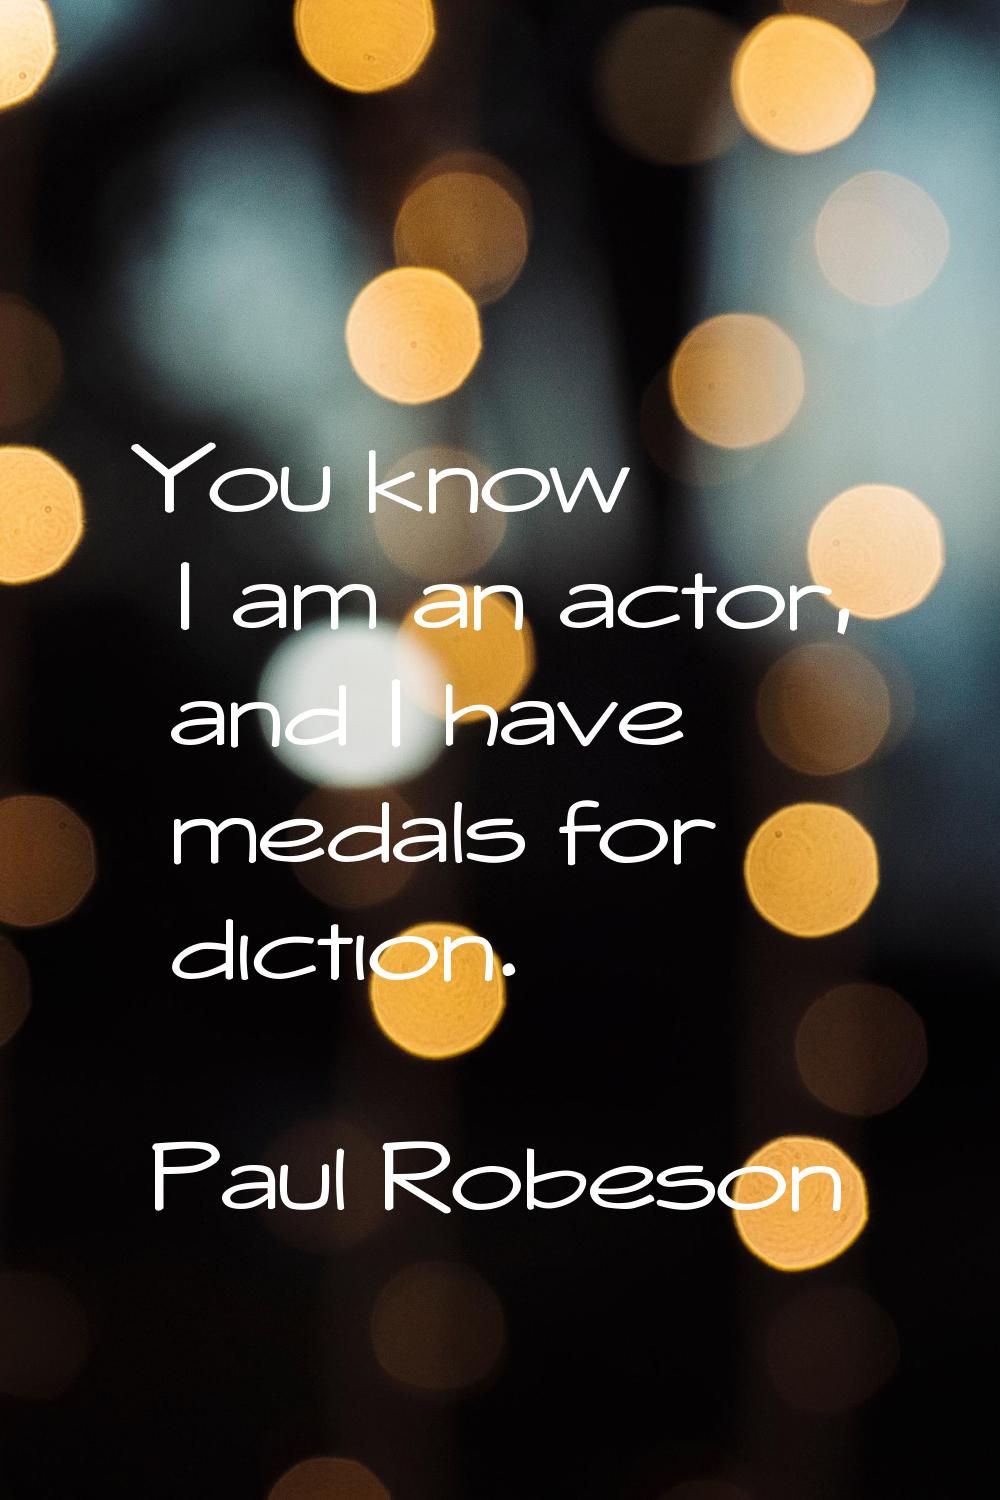 You know I am an actor, and I have medals for diction.